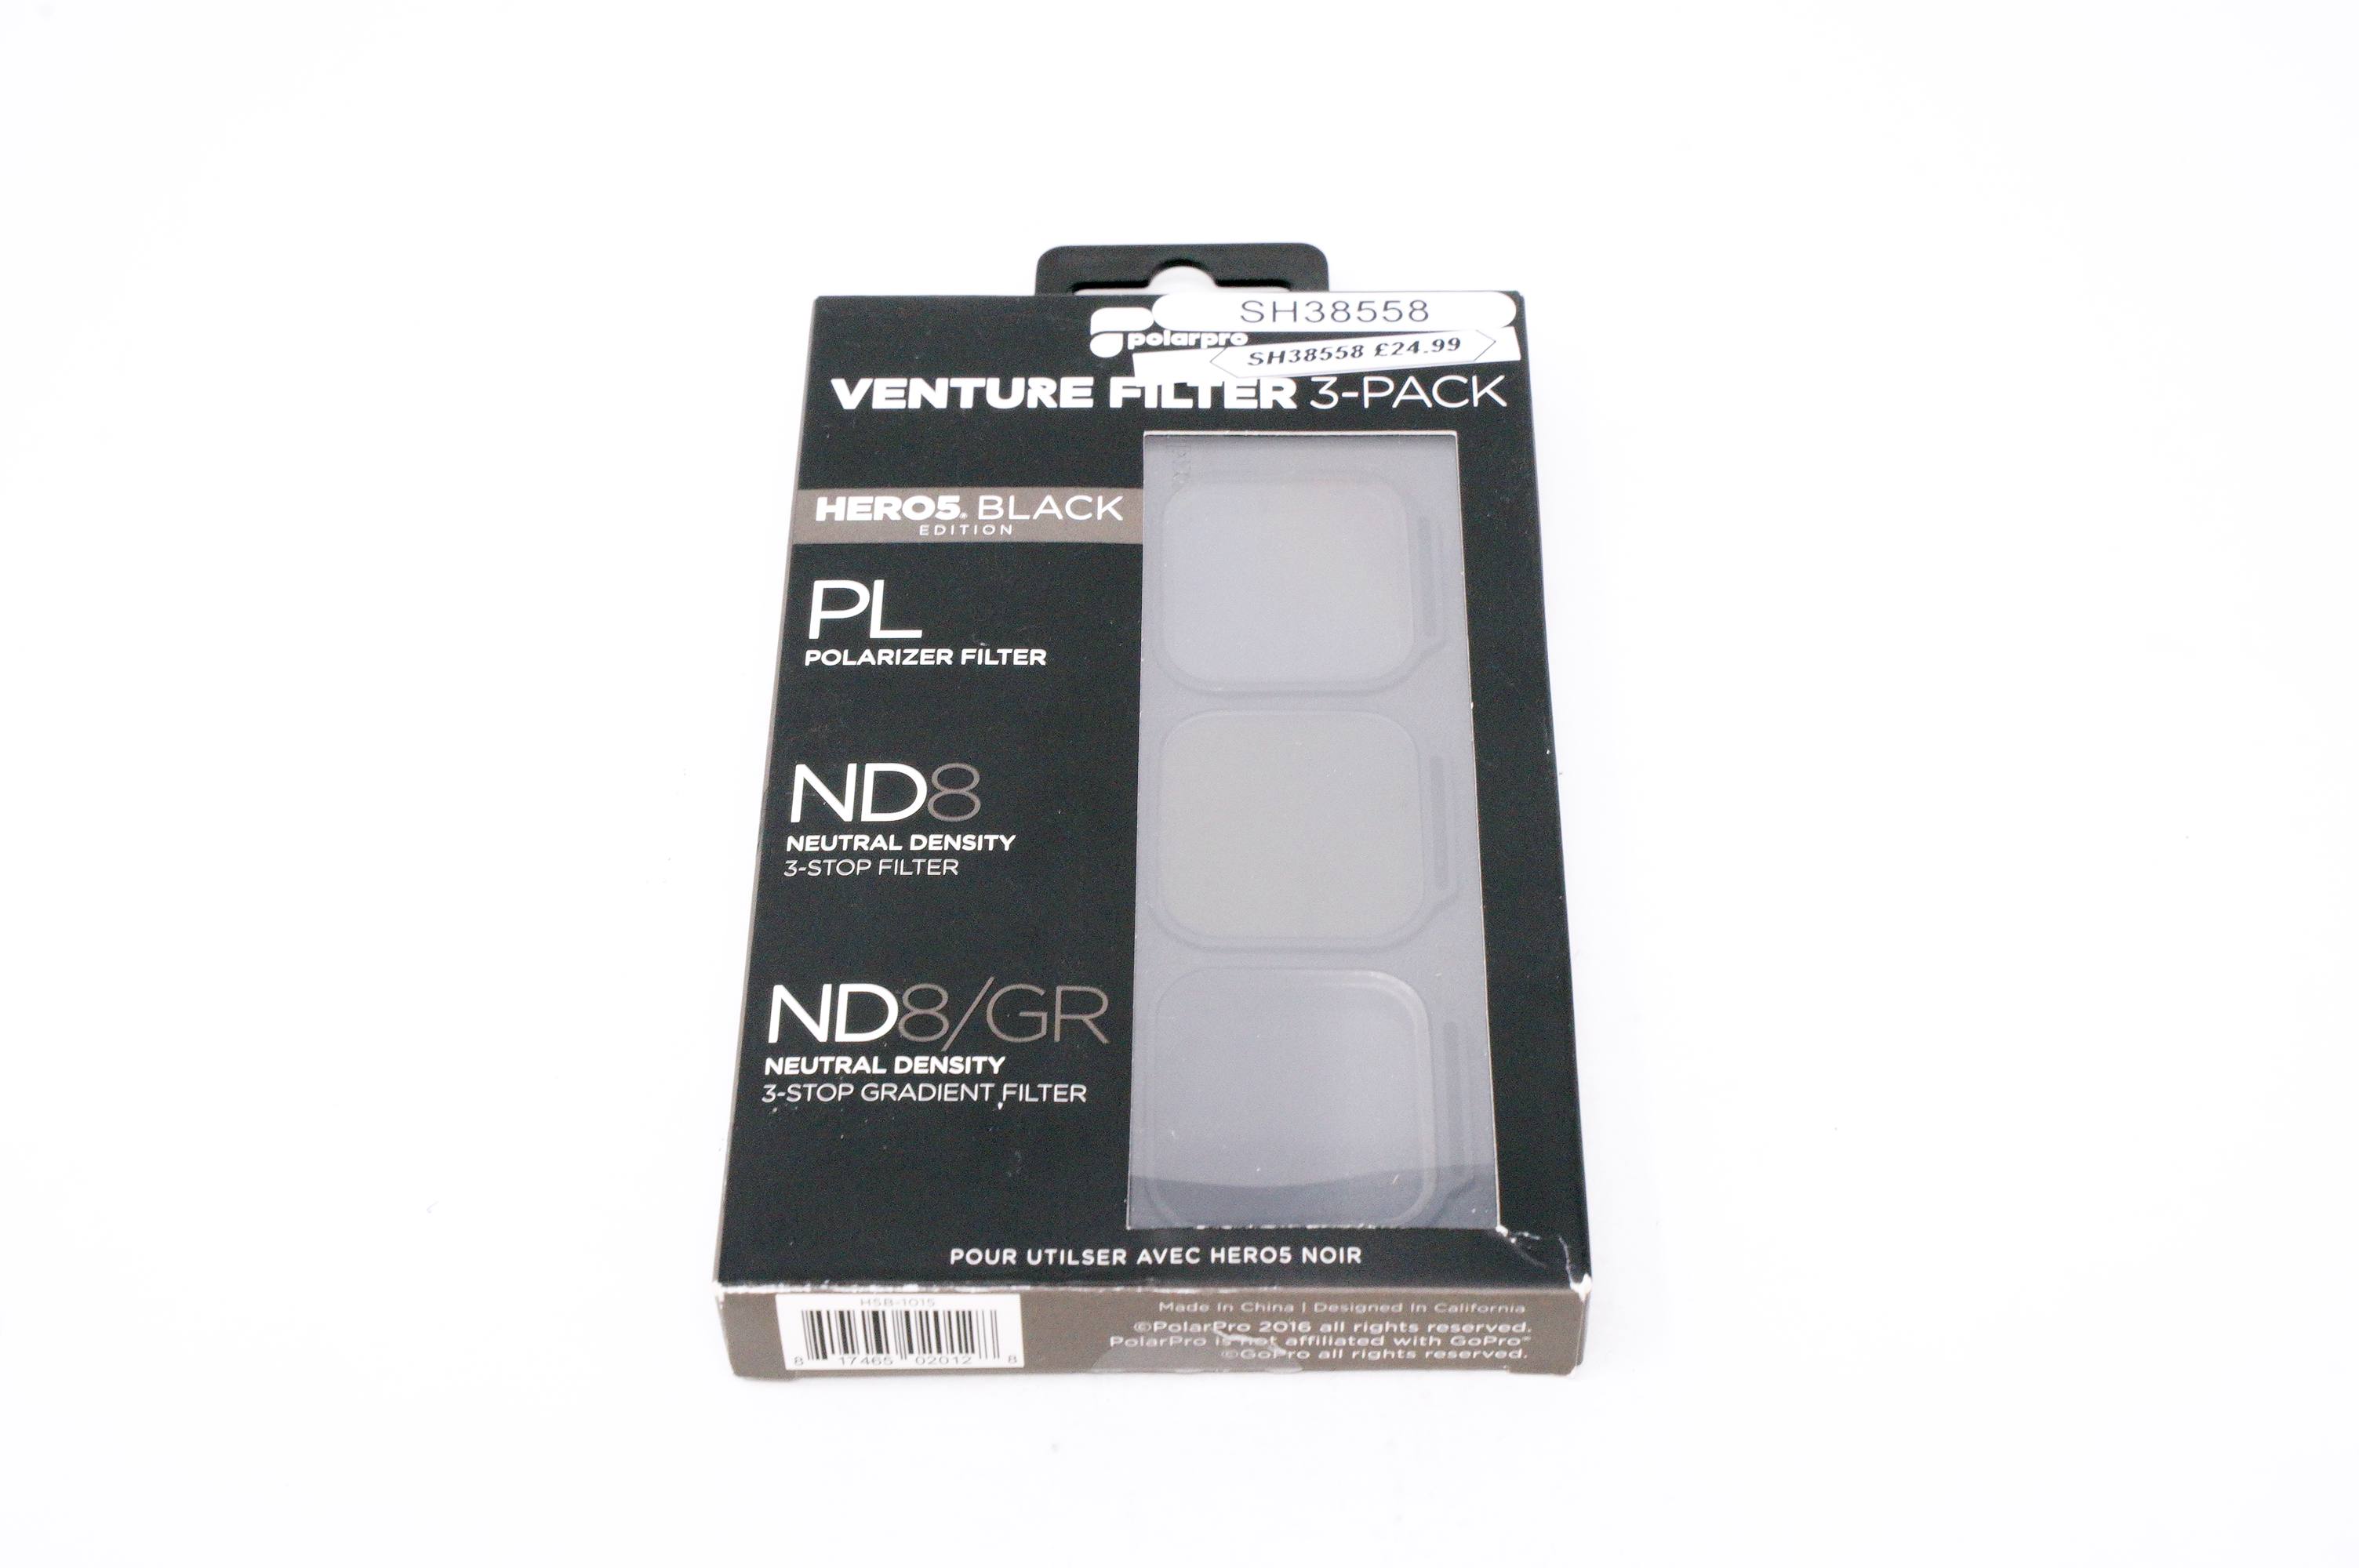 Product Image of Used Venture ND filters for Gopro Hero 5 action camera (Boxed SH38558)